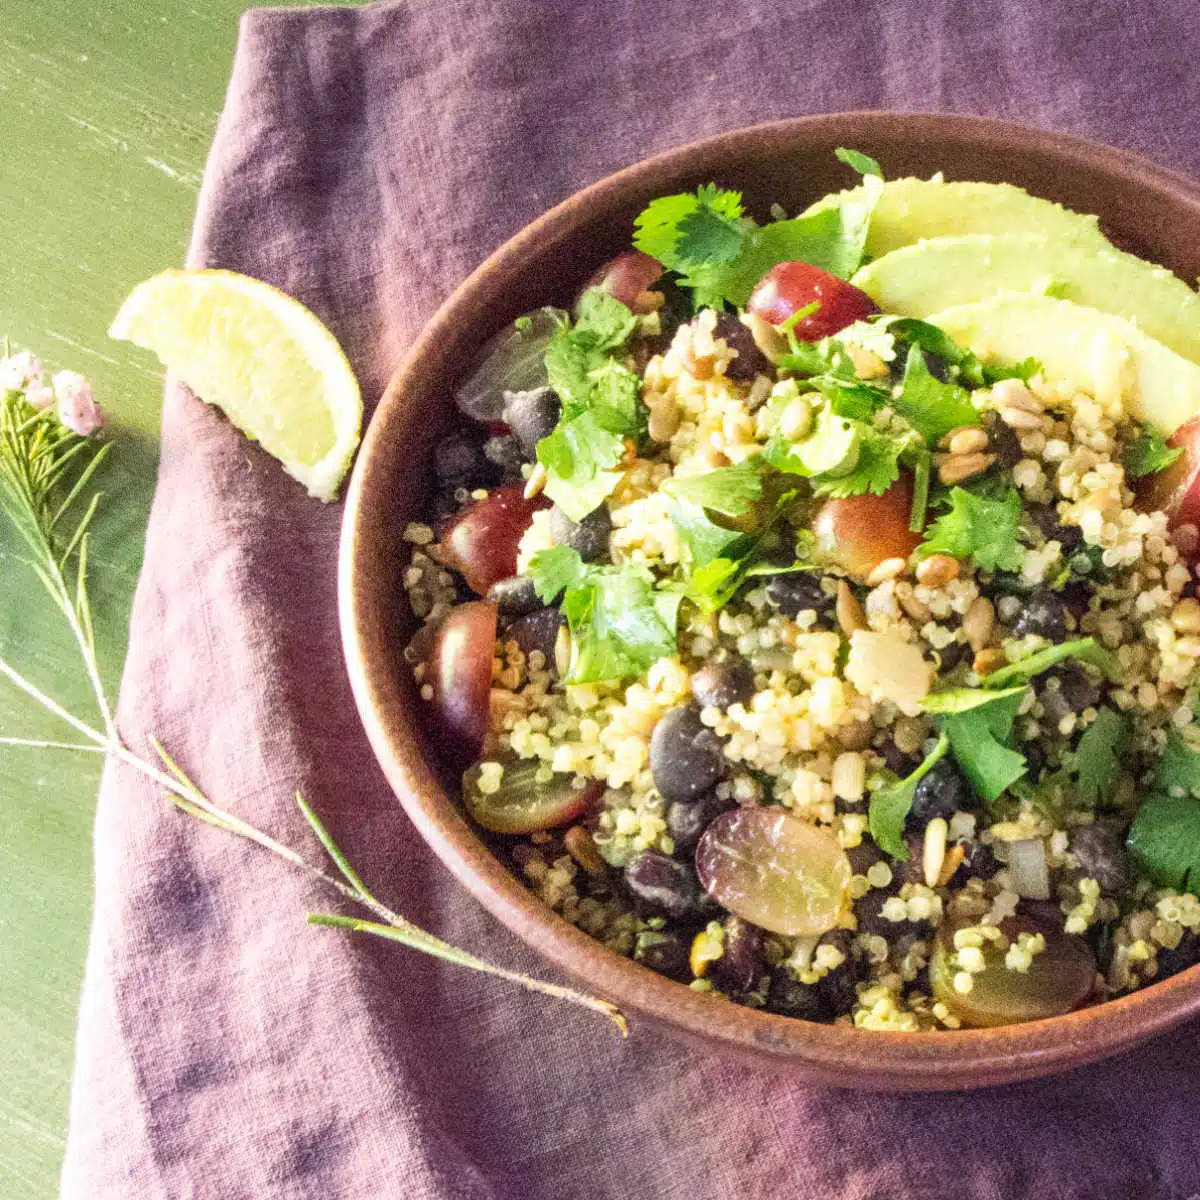 A bowl of quinoa, black beans, grapes, avocado and cilantro, on a tea towel with a slice of lime.